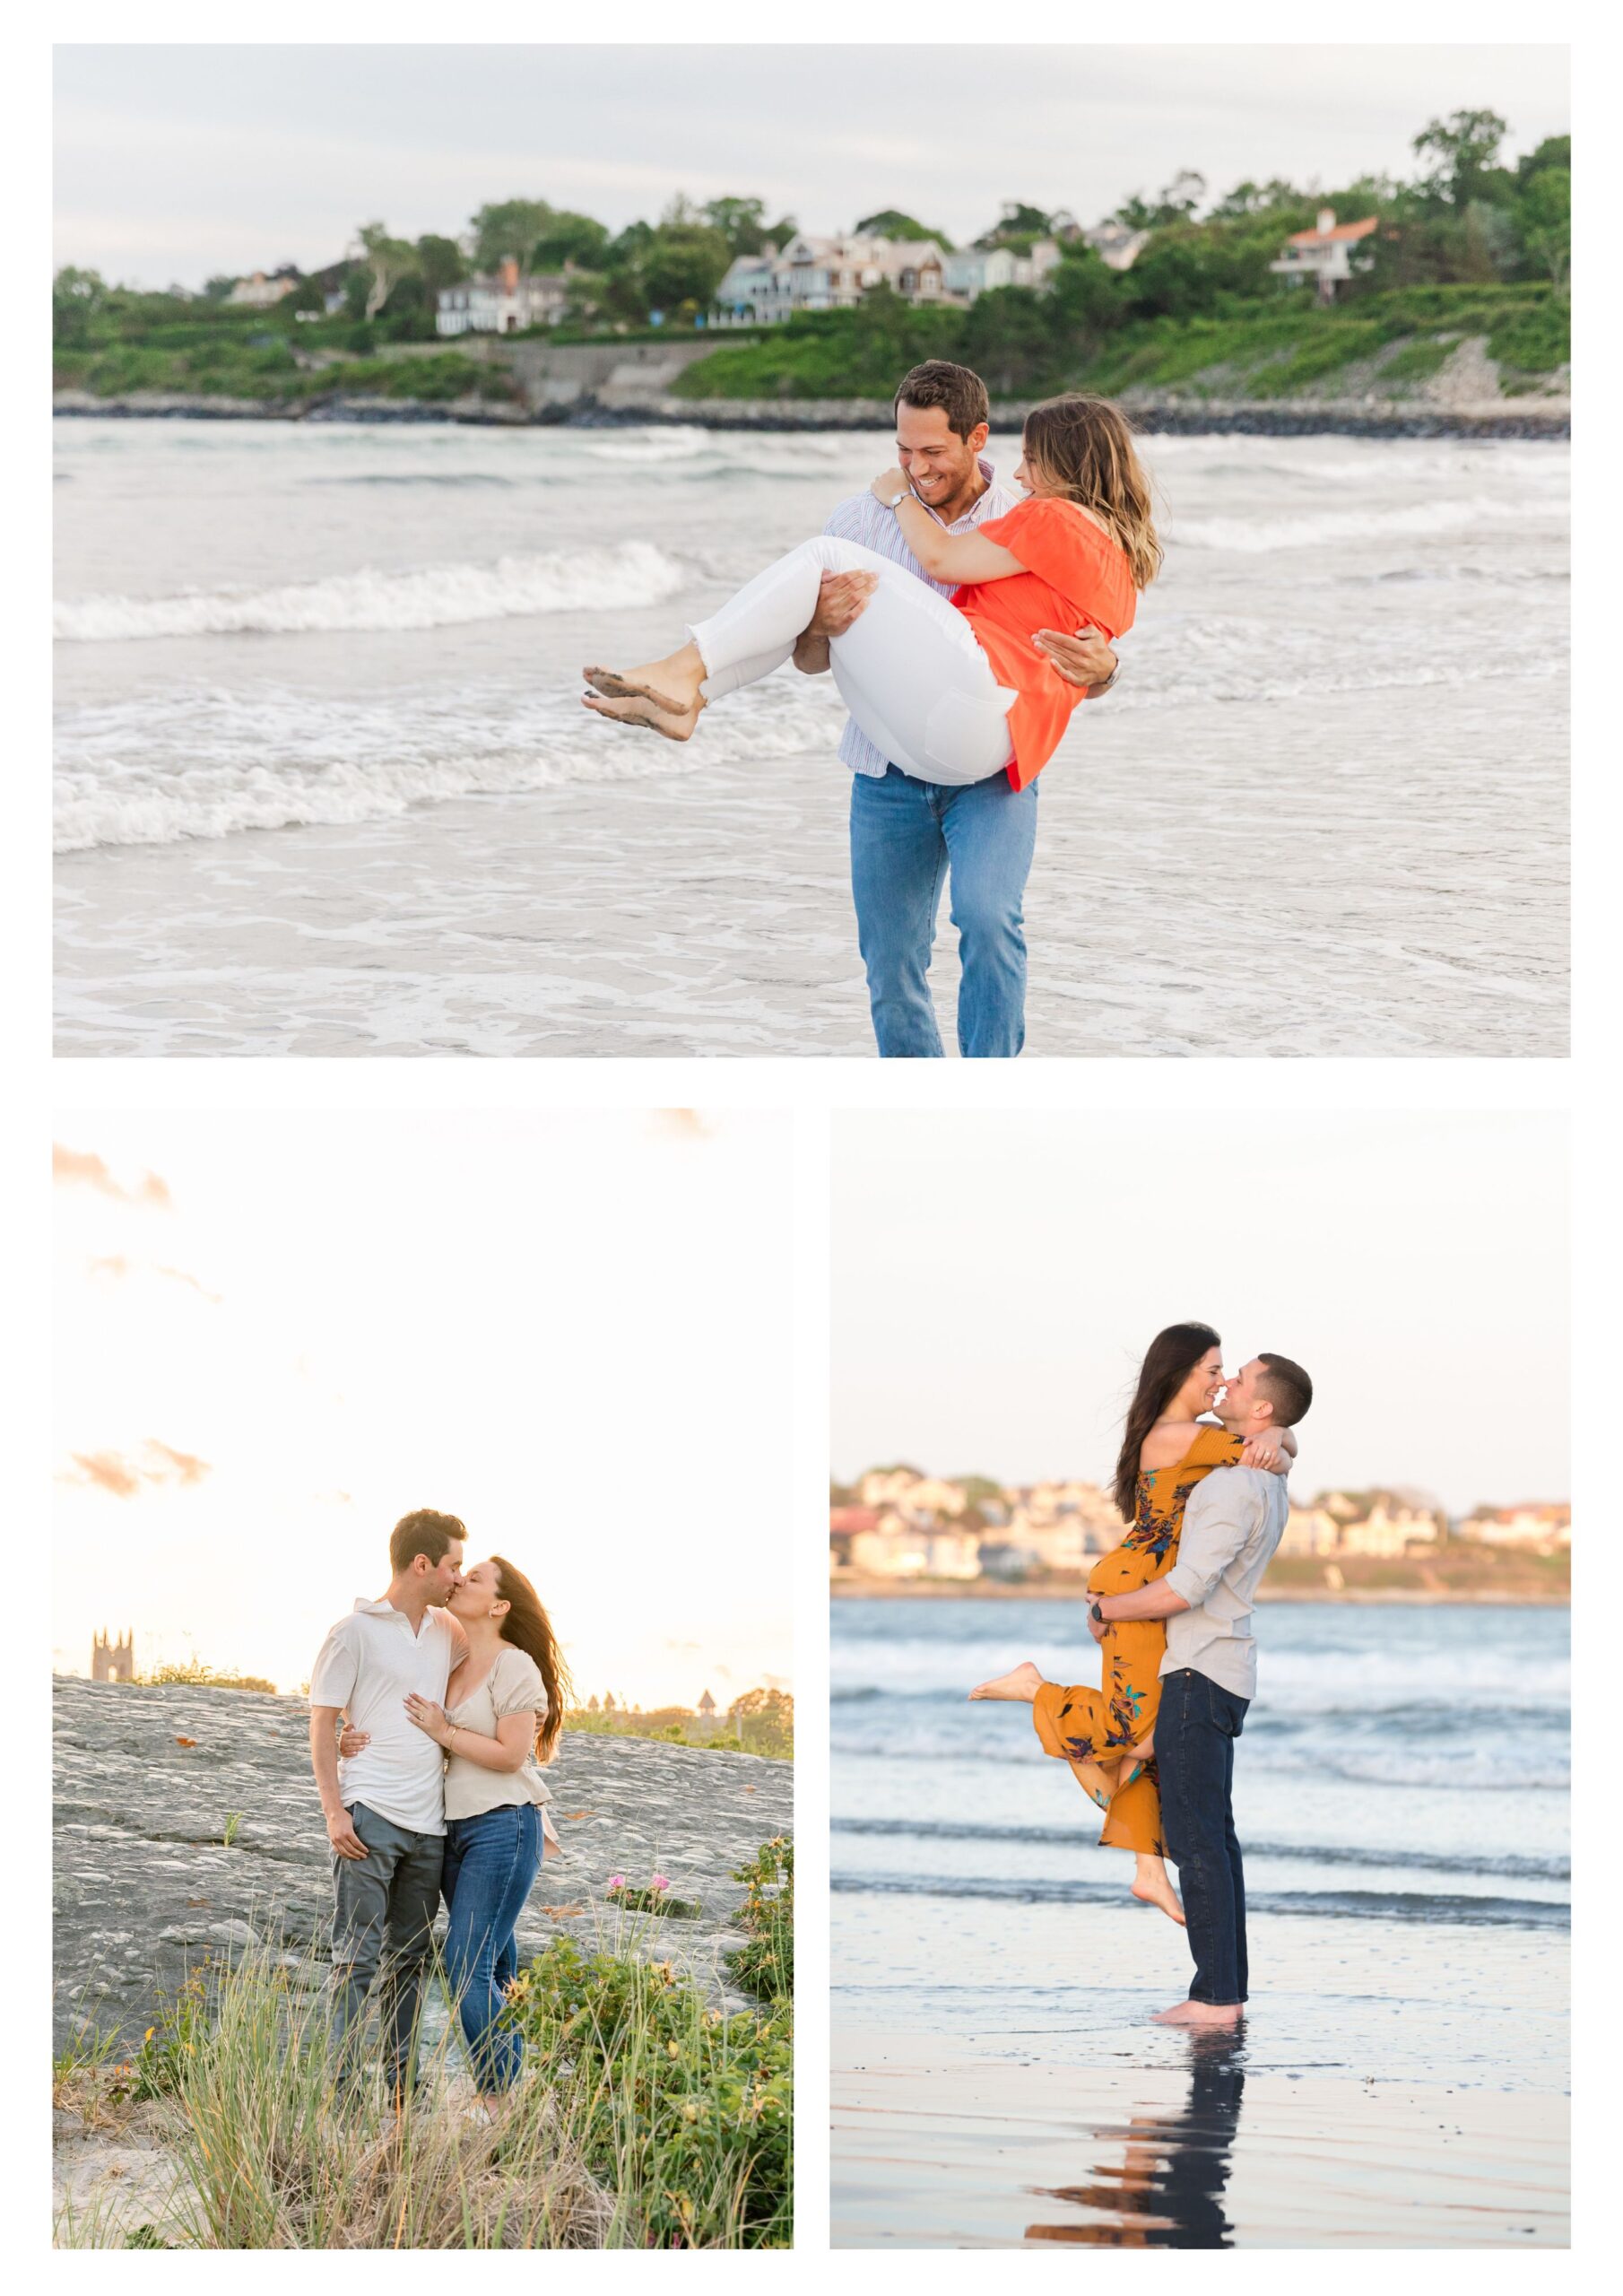 The collage of engaged couples showcase the beautiful setting of Newports First and Second Beach